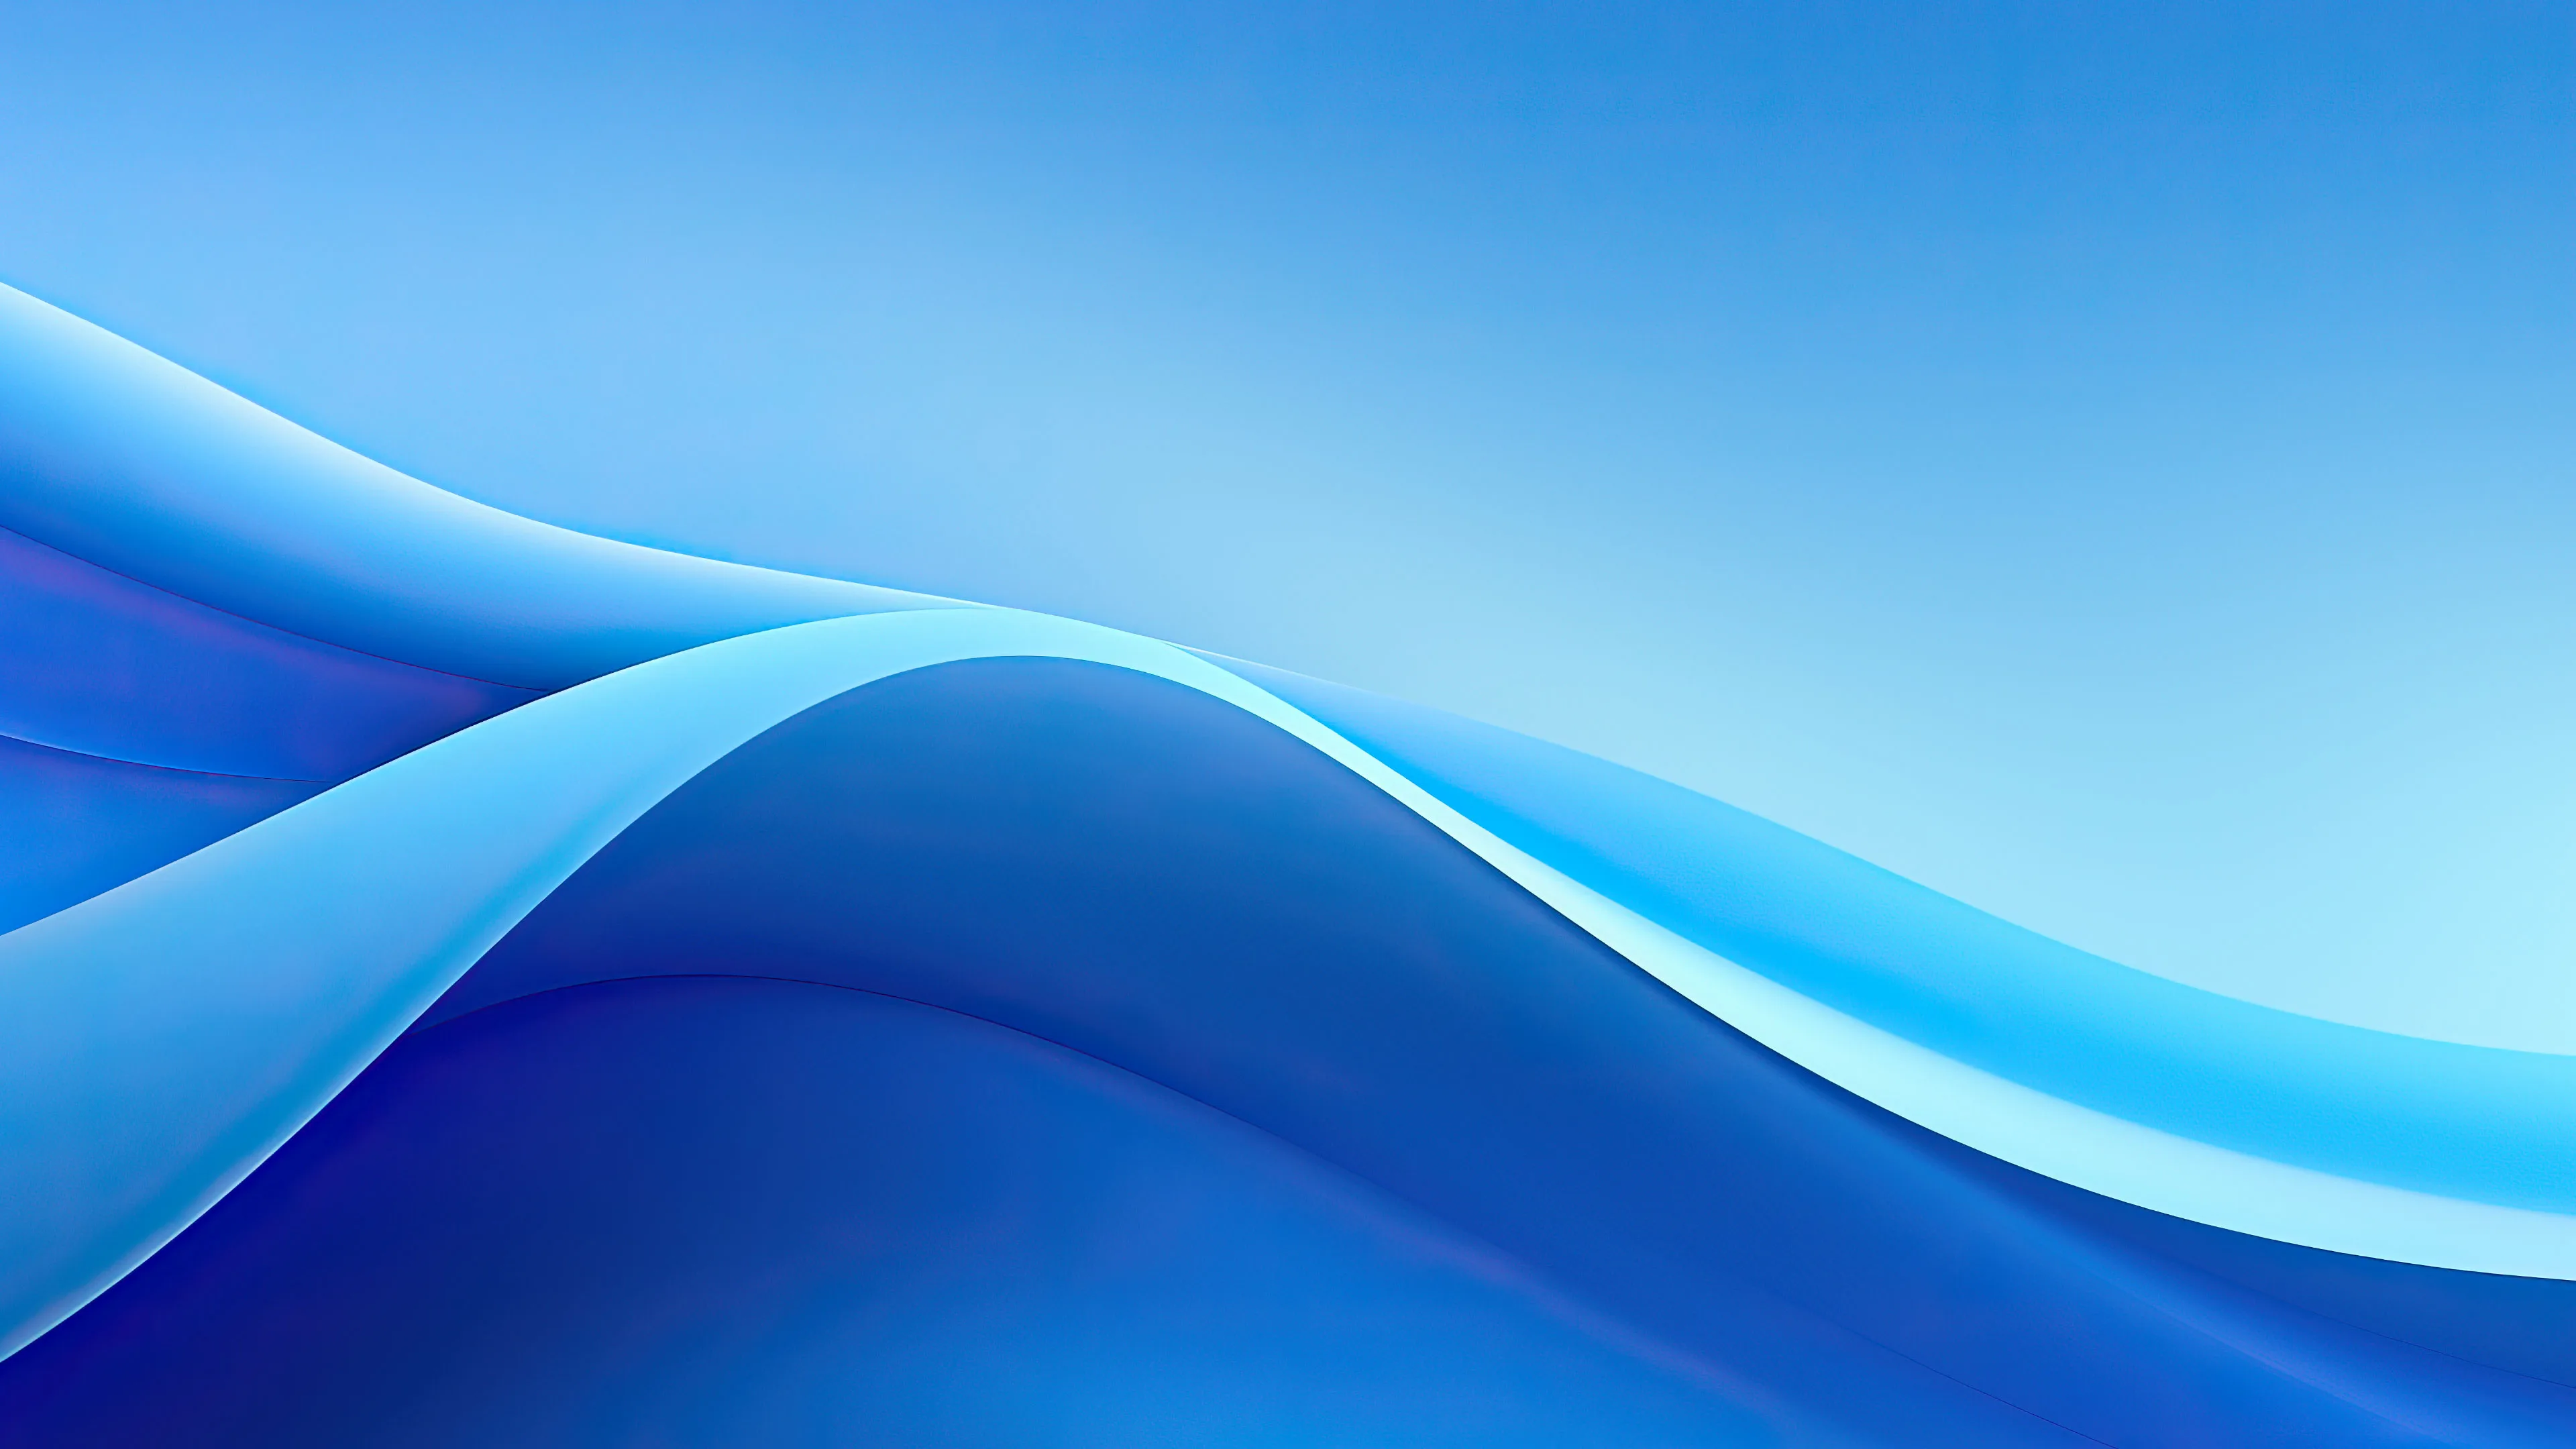 A minimalist 4K wallpaper featuring graceful blue curves against a clean background. The elegant curves create a soothing visual experience, perfect for enhancing your desktop or mobile screen with a touch of contemporary artistry.